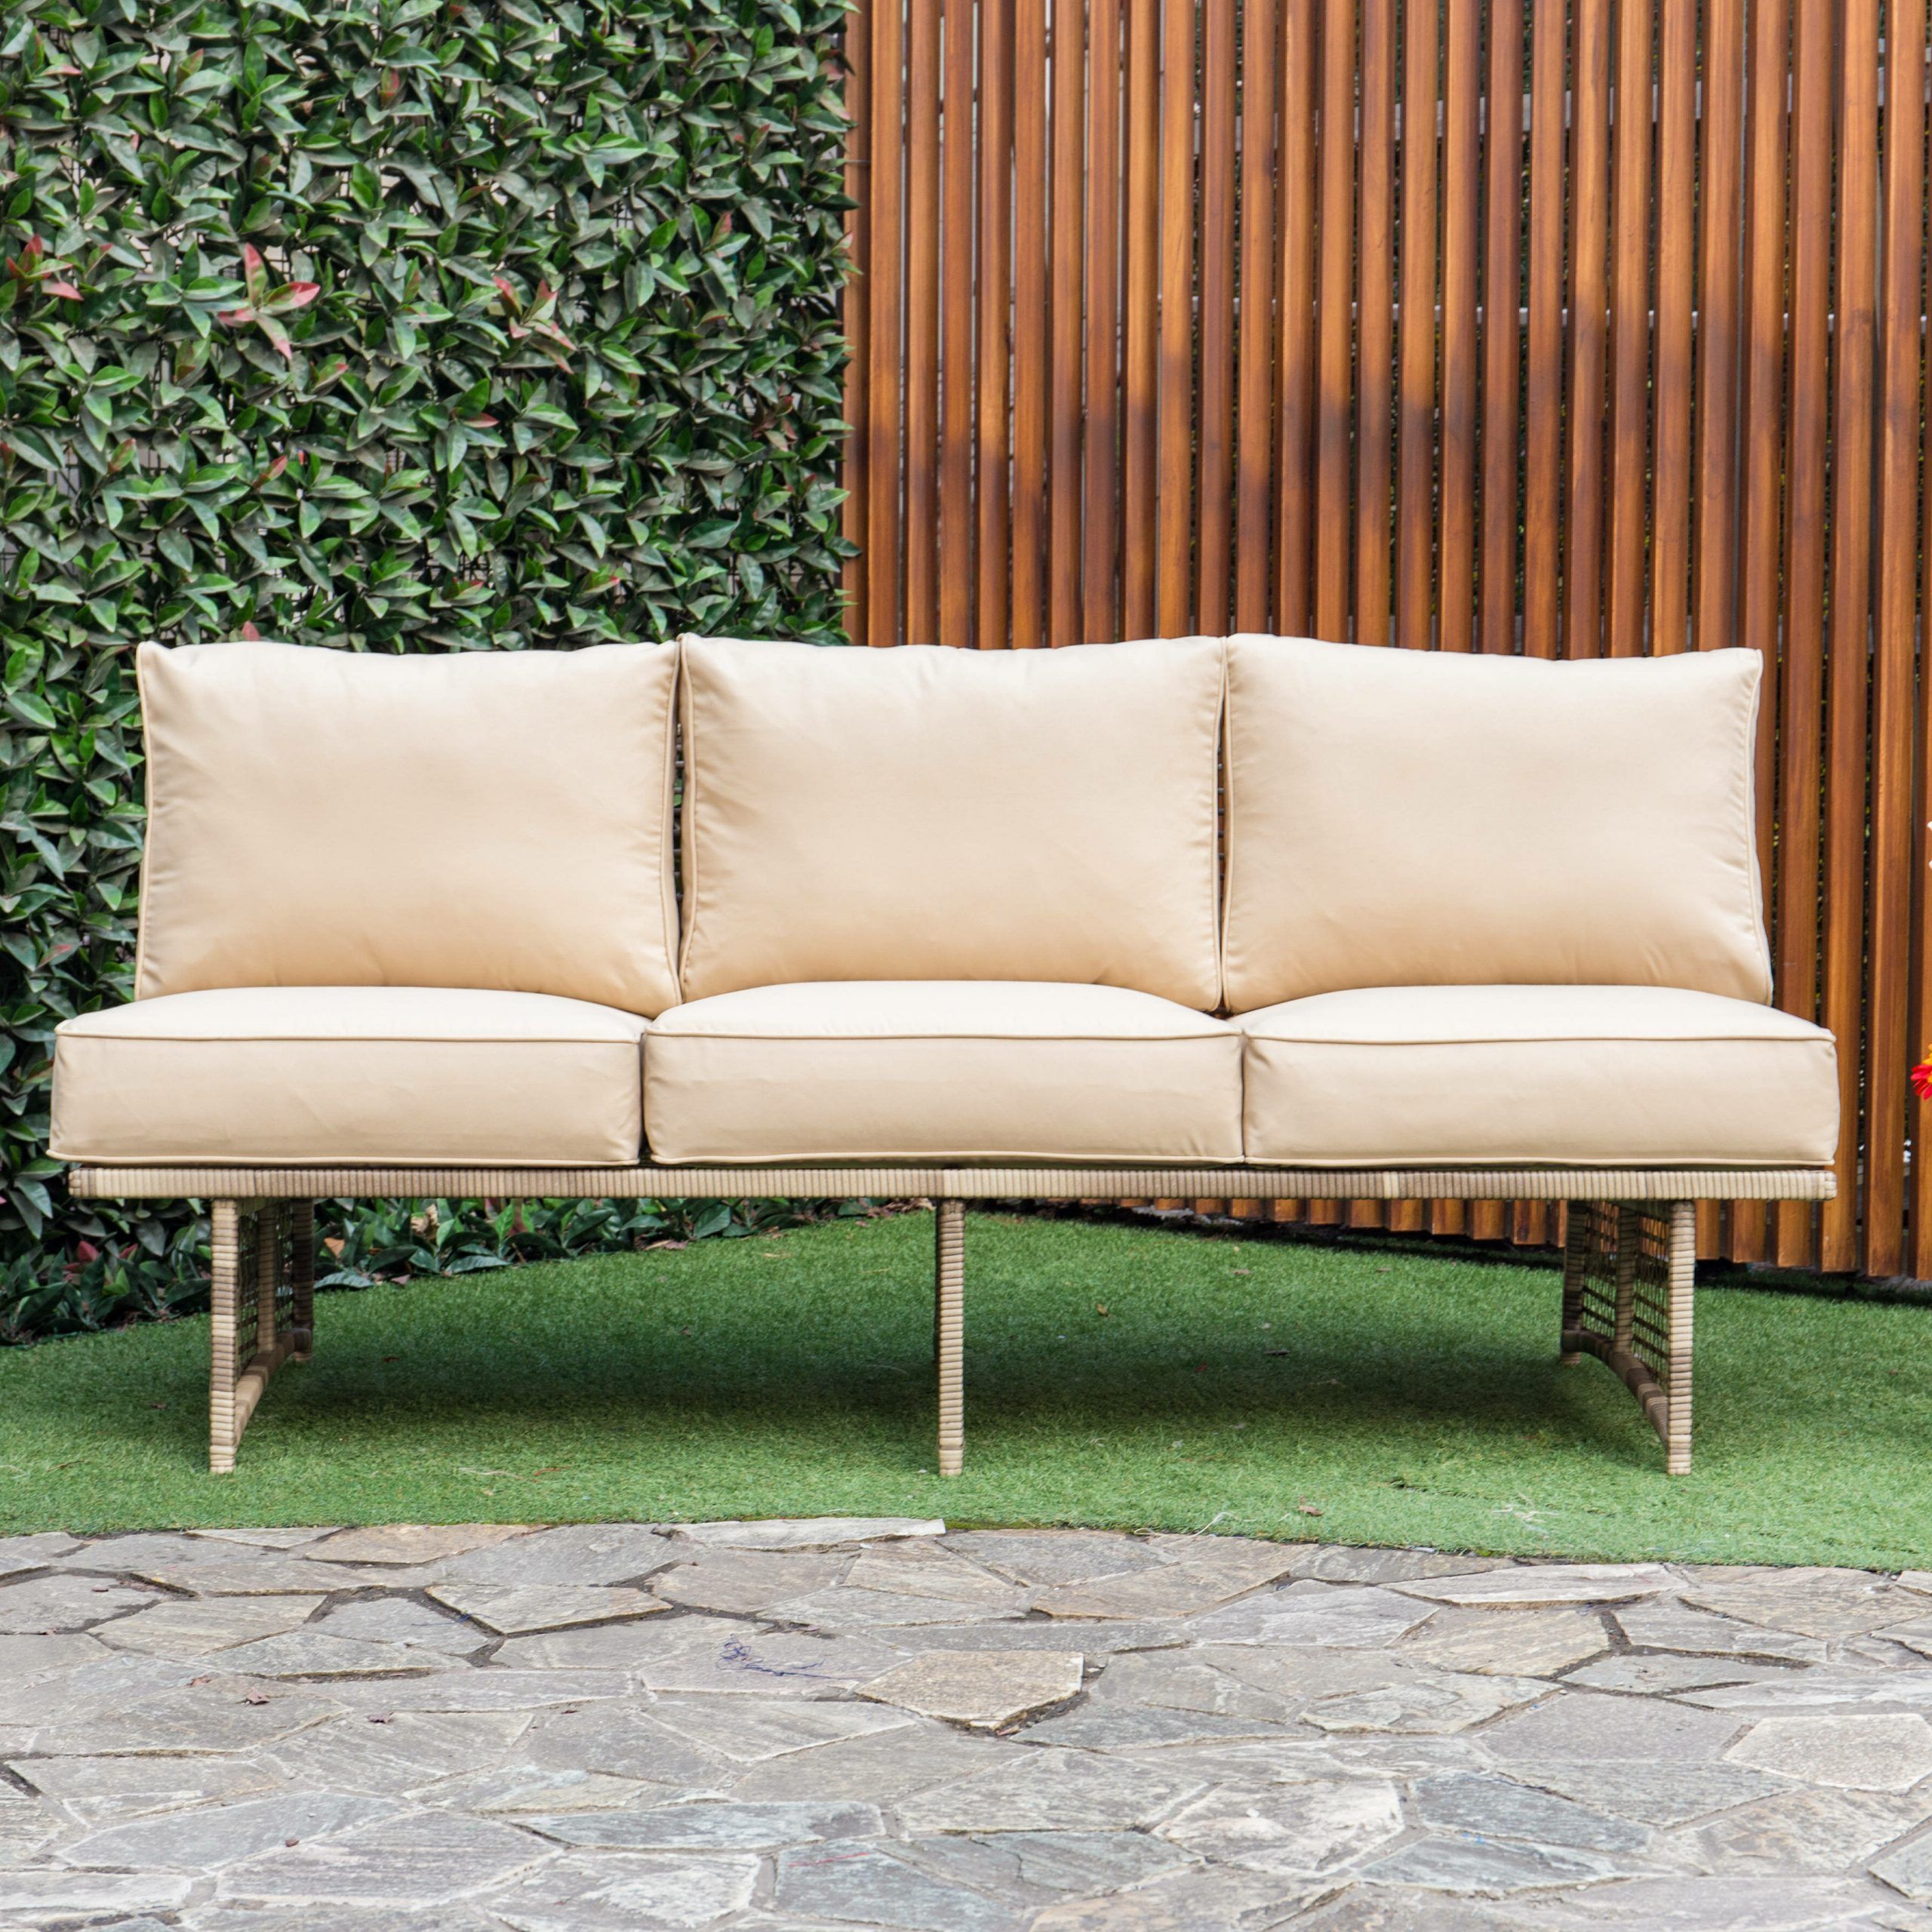 Well Known Dakota Outdoor Rattan Patio Sofa With Cushions Inside Lobdell Patio Sofas With Cushions (View 9 of 25)